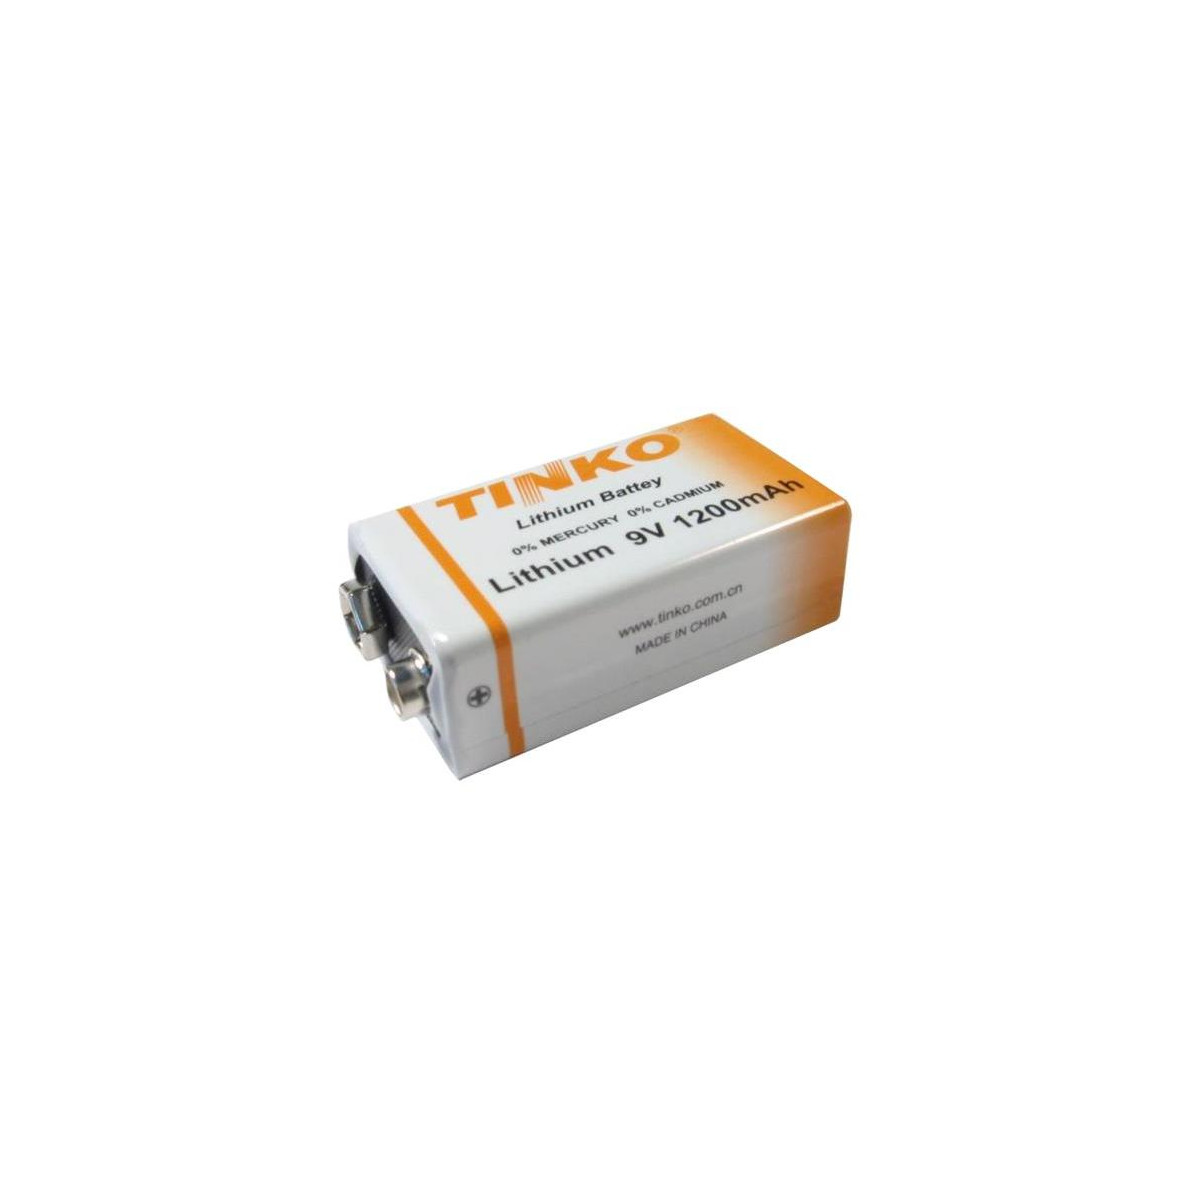 More about Baterie lithiová 6F22 9V/1200mAh TINKO